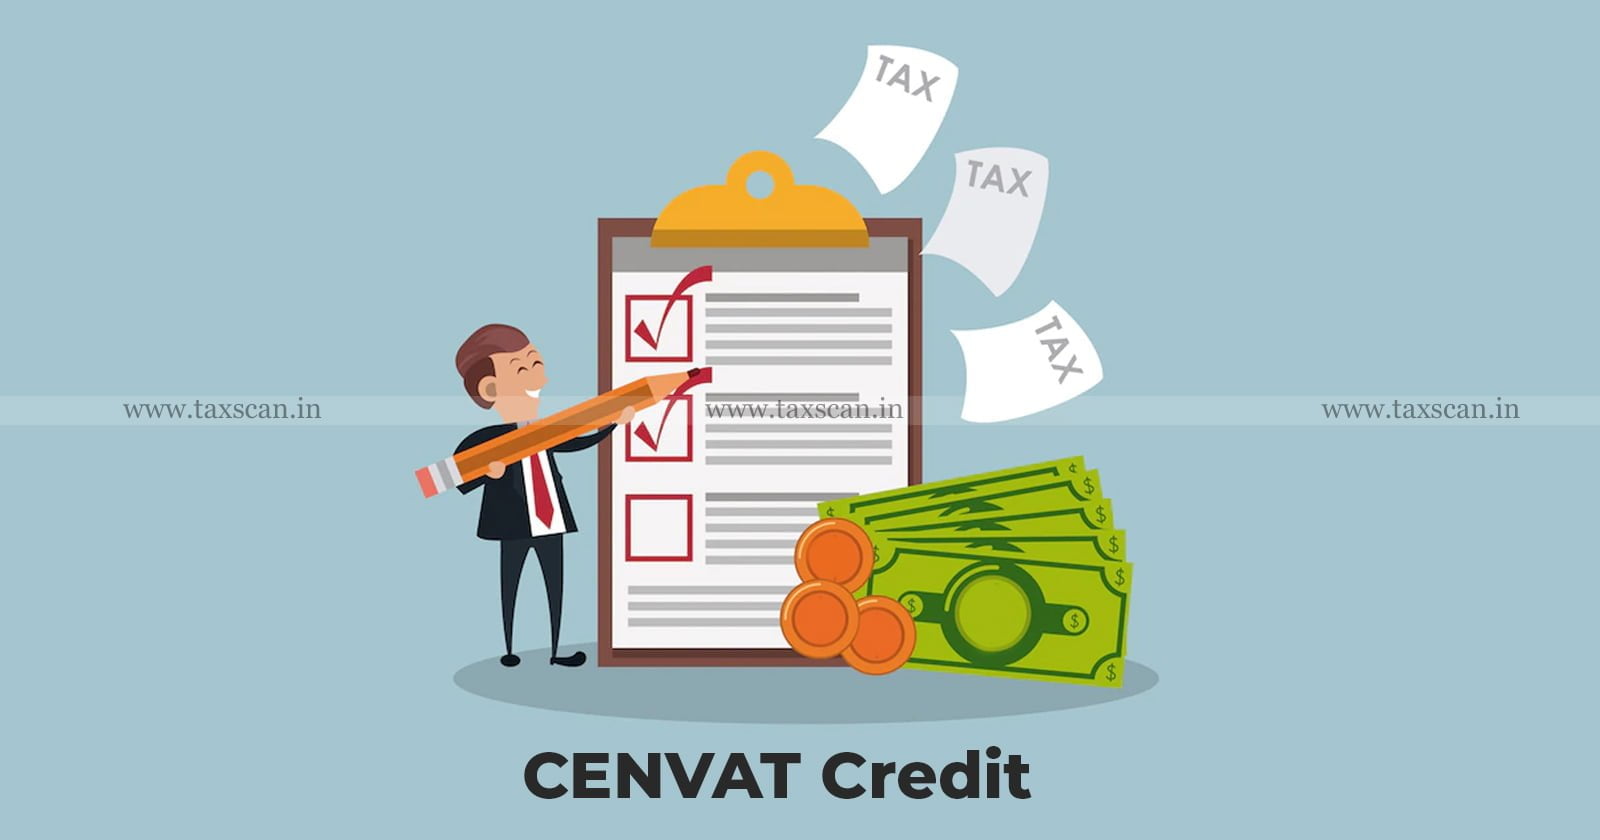 Denial of CENVAT Credit - Duty Shown in Invoices - CENVAT Credit - Non-disclosure of Genuine Invoices -Invoices - CESTAT - CESTAT Quashes Order - taxscan